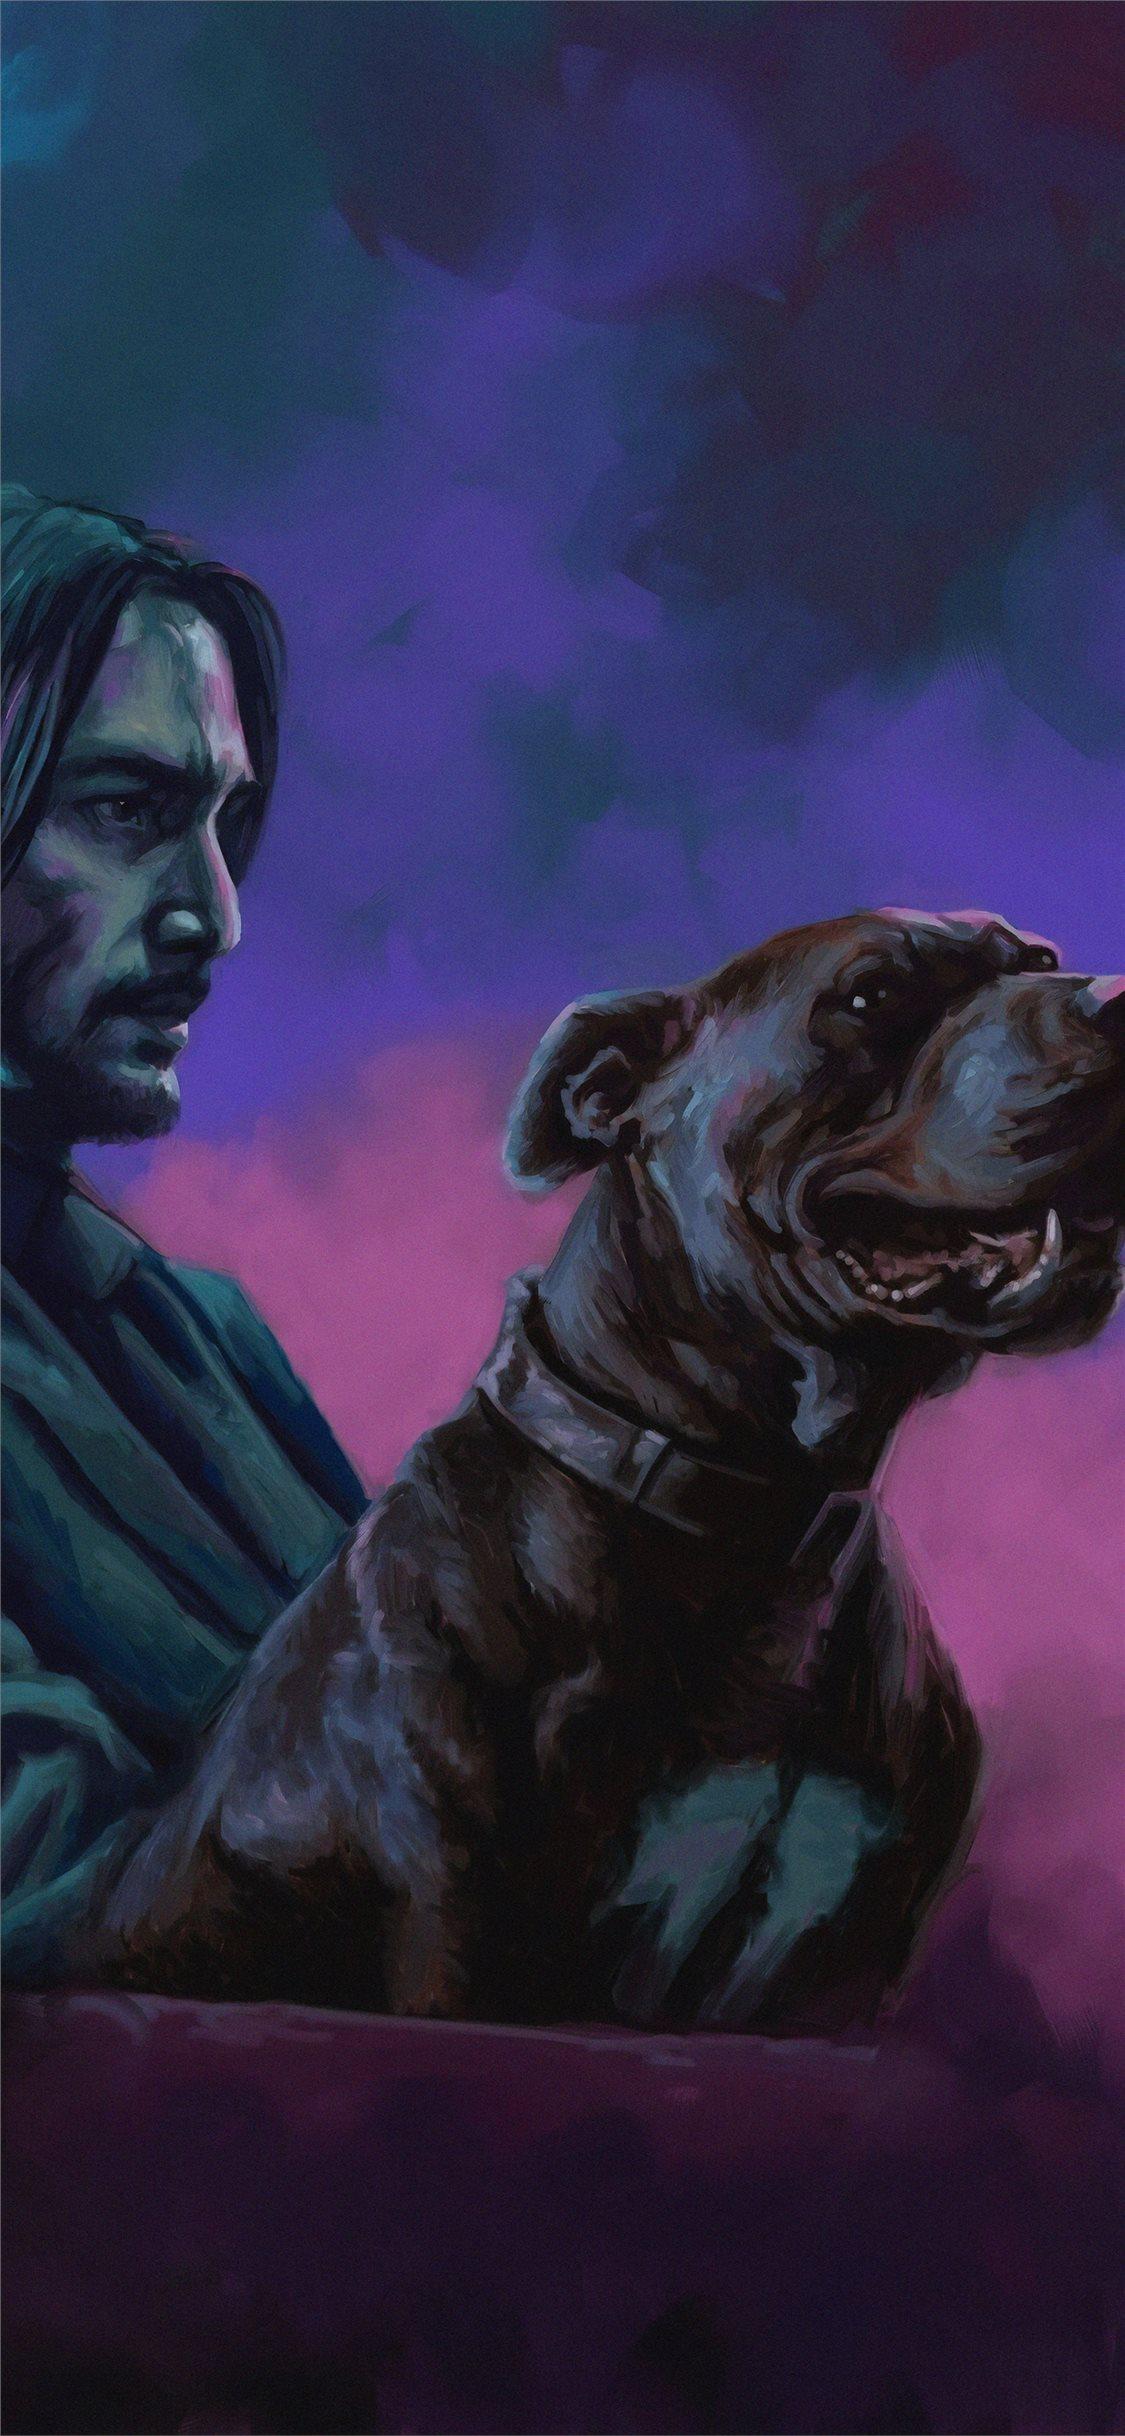 John Wick wallpaper by TH3H4CK3R  Download on ZEDGE  54a8